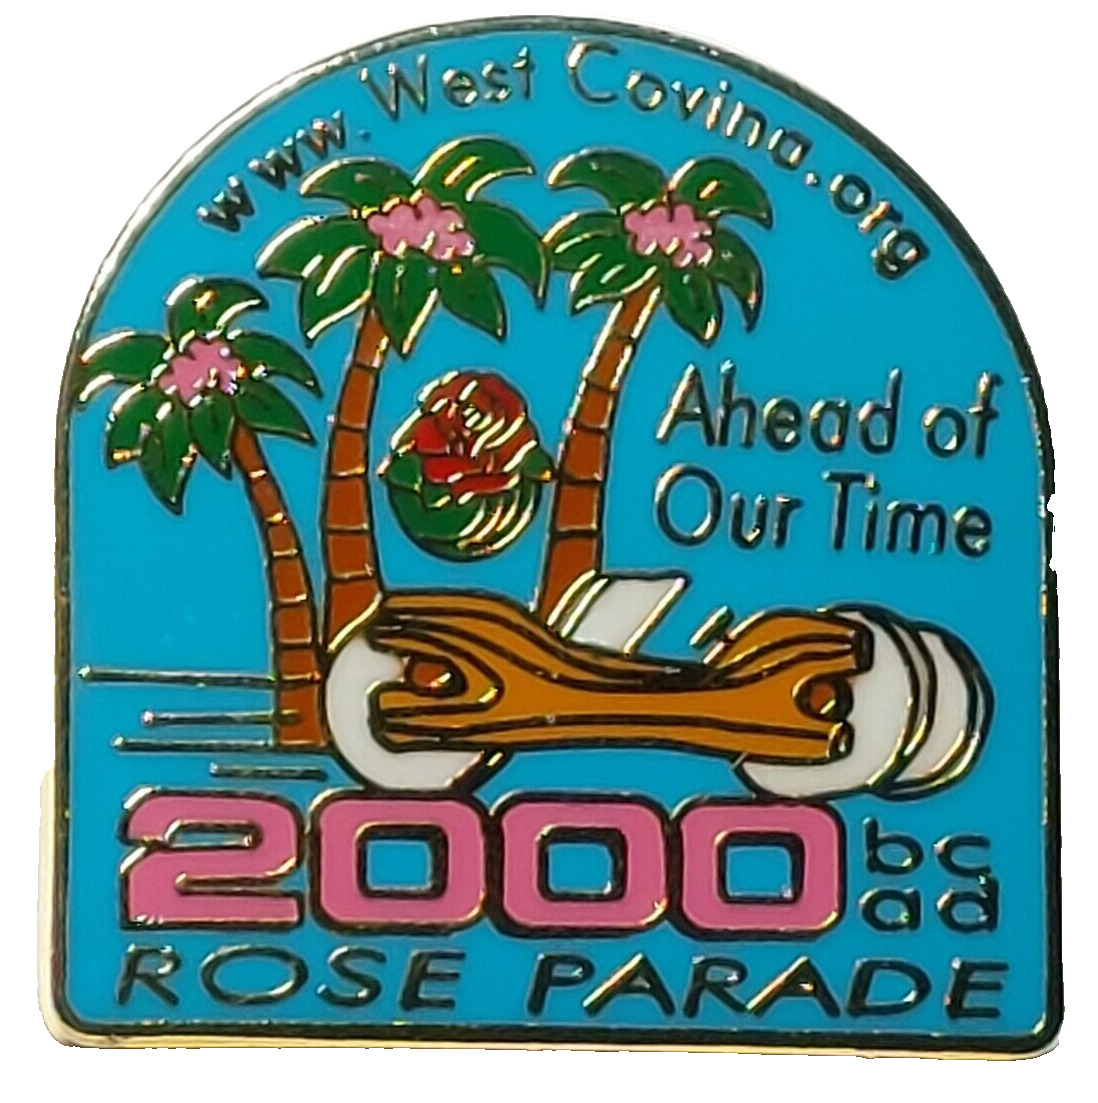 Rose Parade 2000 www. West Covina .org 111th Tournament of Roses Lapel Pin